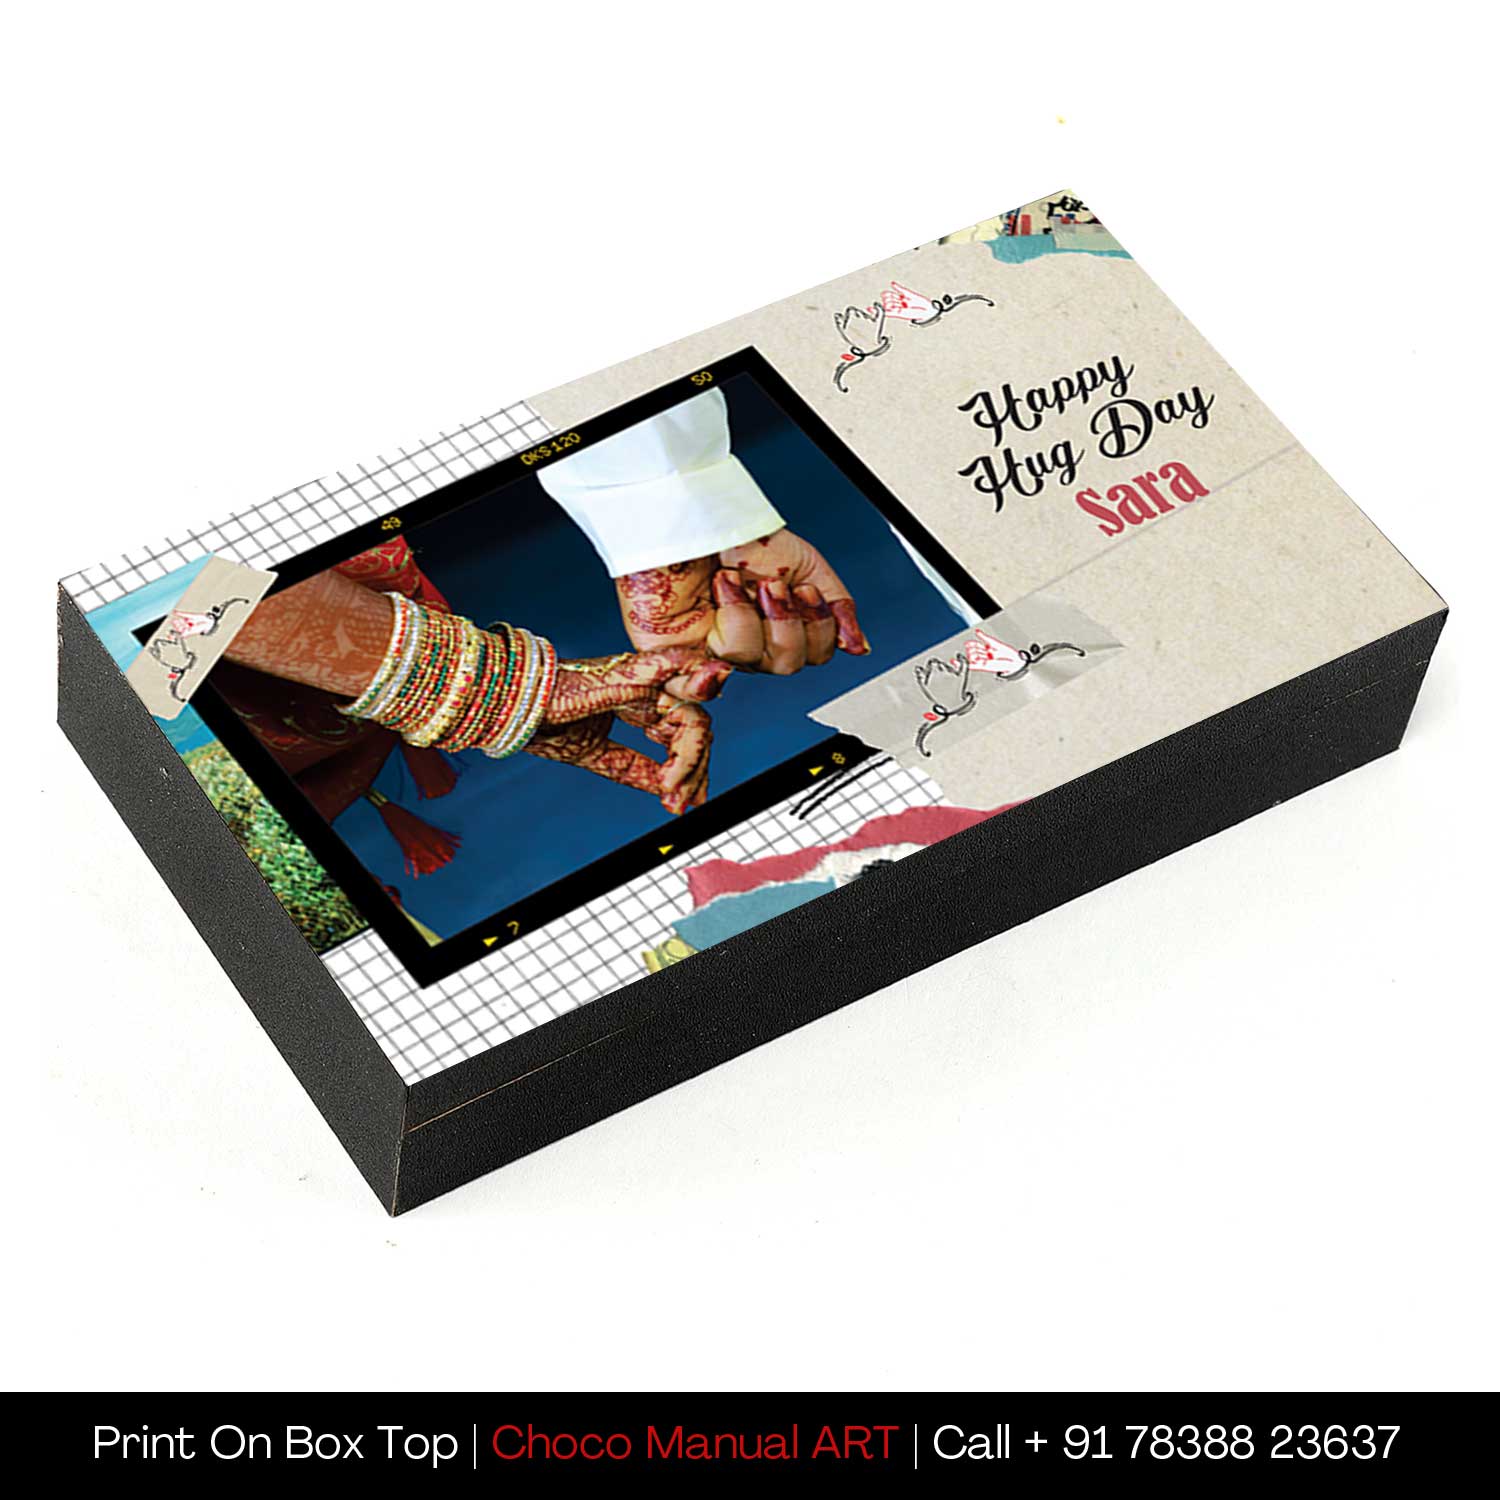 Best Hug Day image/name printed gift for friend